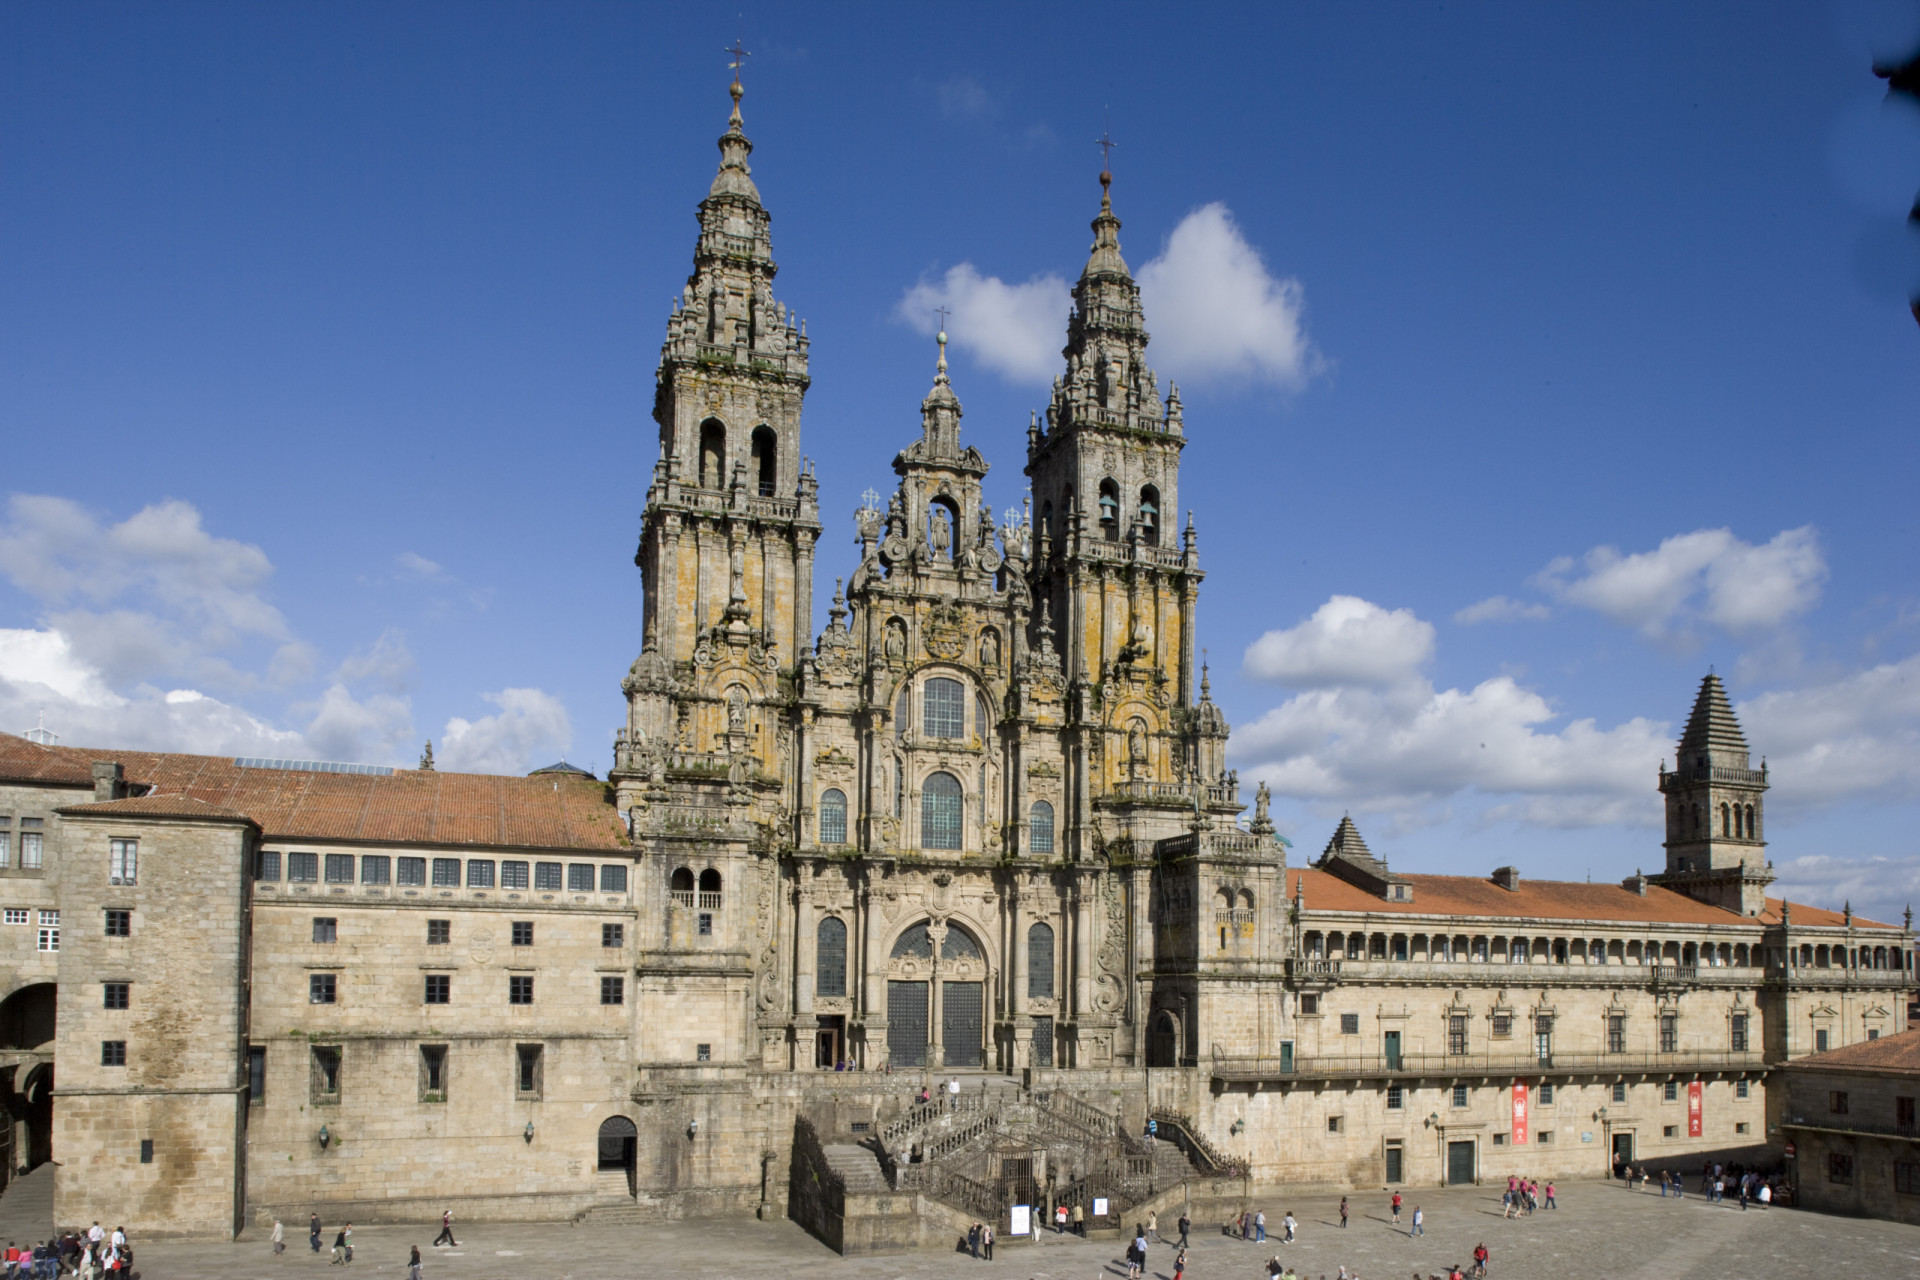 <p>One of the oldest pilgrimage routes in the world, it terminates at the cathedral of Santiago de Compostela in Northern <a href="https://www.starsinsider.com/movies/494206/spectacular-movies-shot-in-spain" rel="noopener">Spain</a>. With many routes, the three most popular are the French Way, Portuguese Way, and Northern Way.</p><p><a href="https://www.msn.com/en-us/community/channel/vid-7xx8mnucu55yw63we9va2gwr7uihbxwc68fxqp25x6tg4ftibpra?cvid=94631541bc0f4f89bfd59158d696ad7e">Follow us and access great exclusive content every day</a></p>